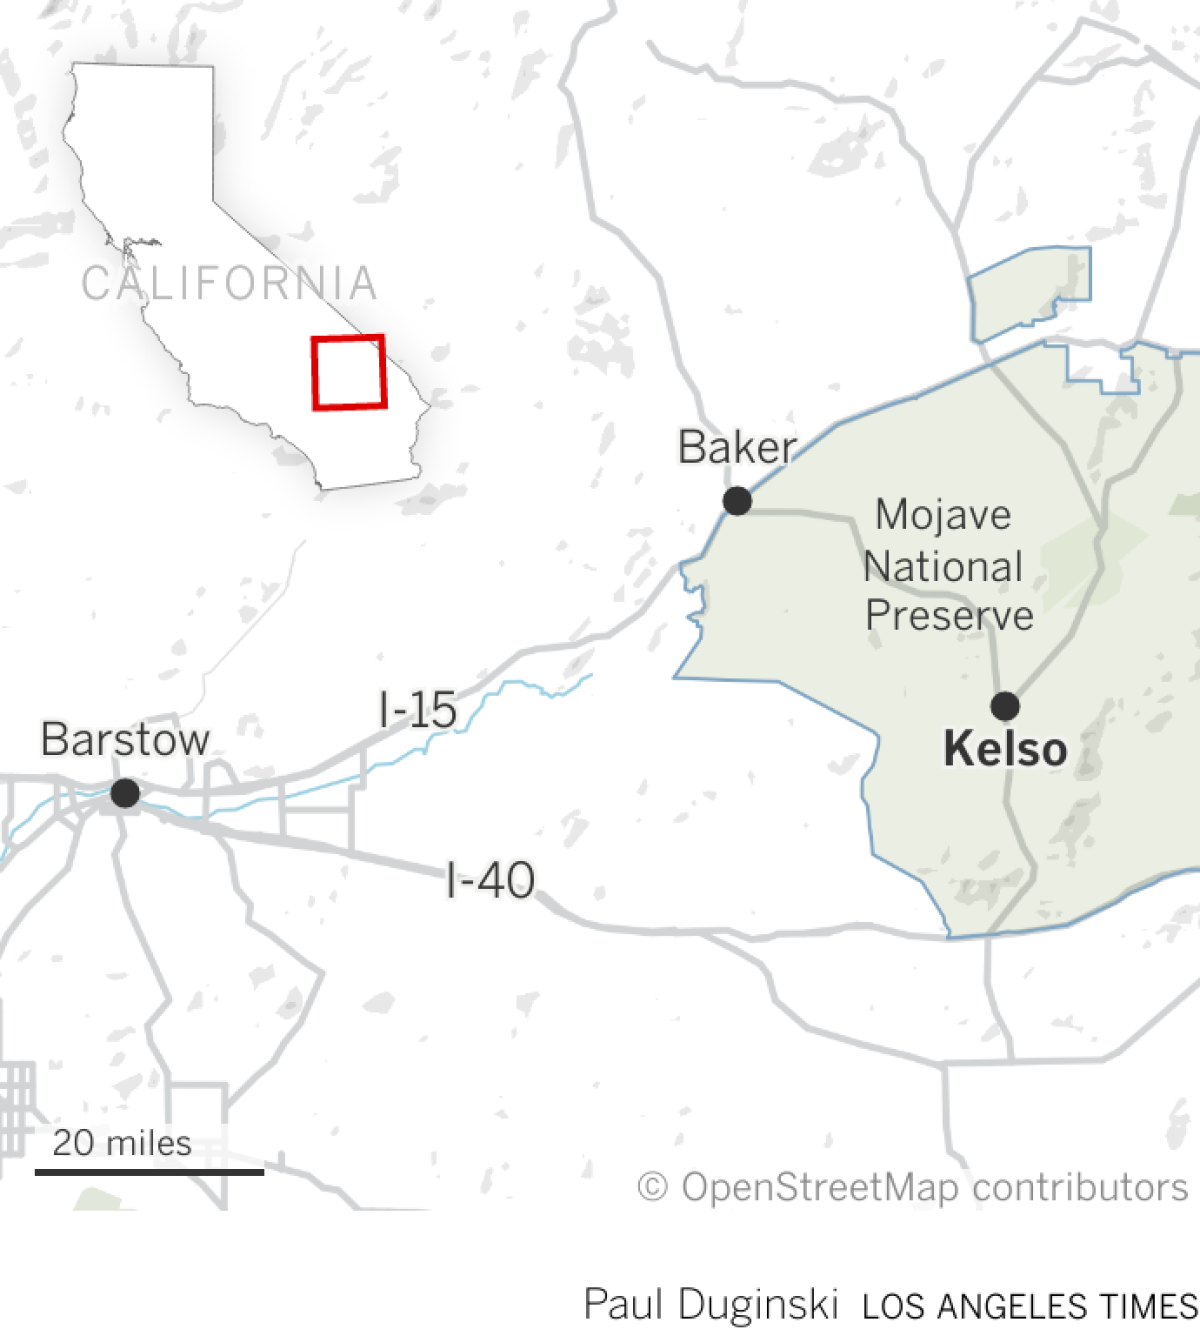 Location of derailment at Kelso, Calif.